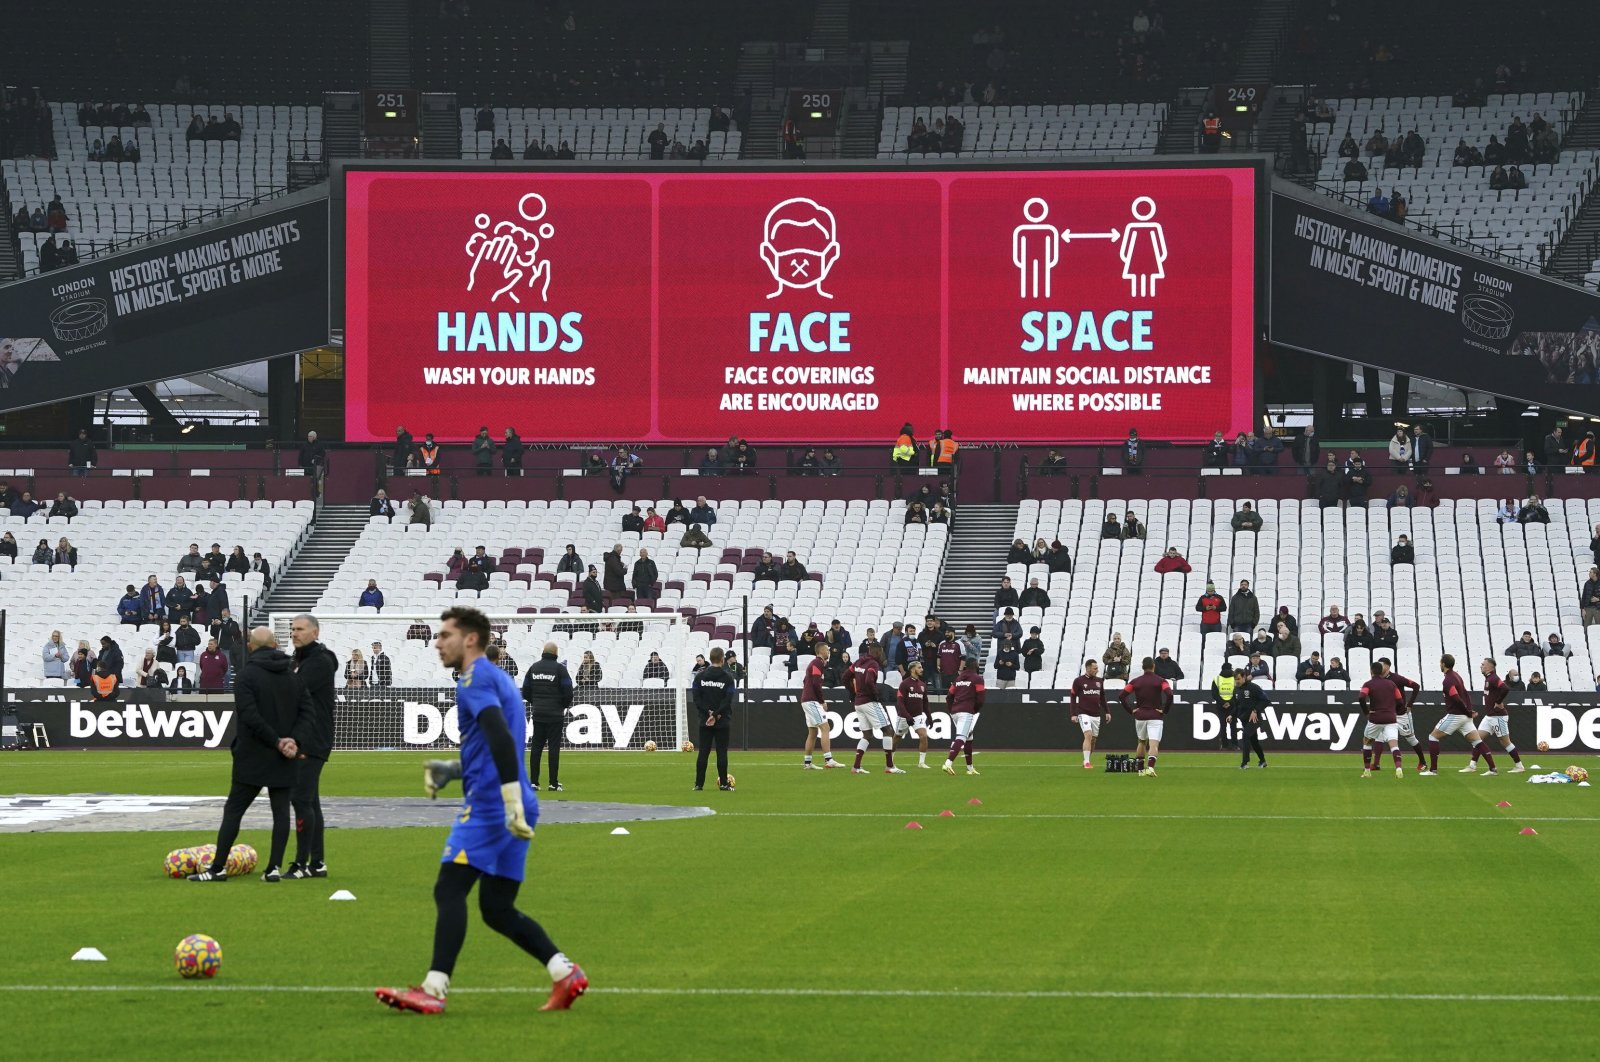 COVID-19 safety signage are seen above the stands before the English Premier League soccer match between West Ham and Southampton, at the London Stadium, U.K., Dec. 26, 2021. (AP Photo)